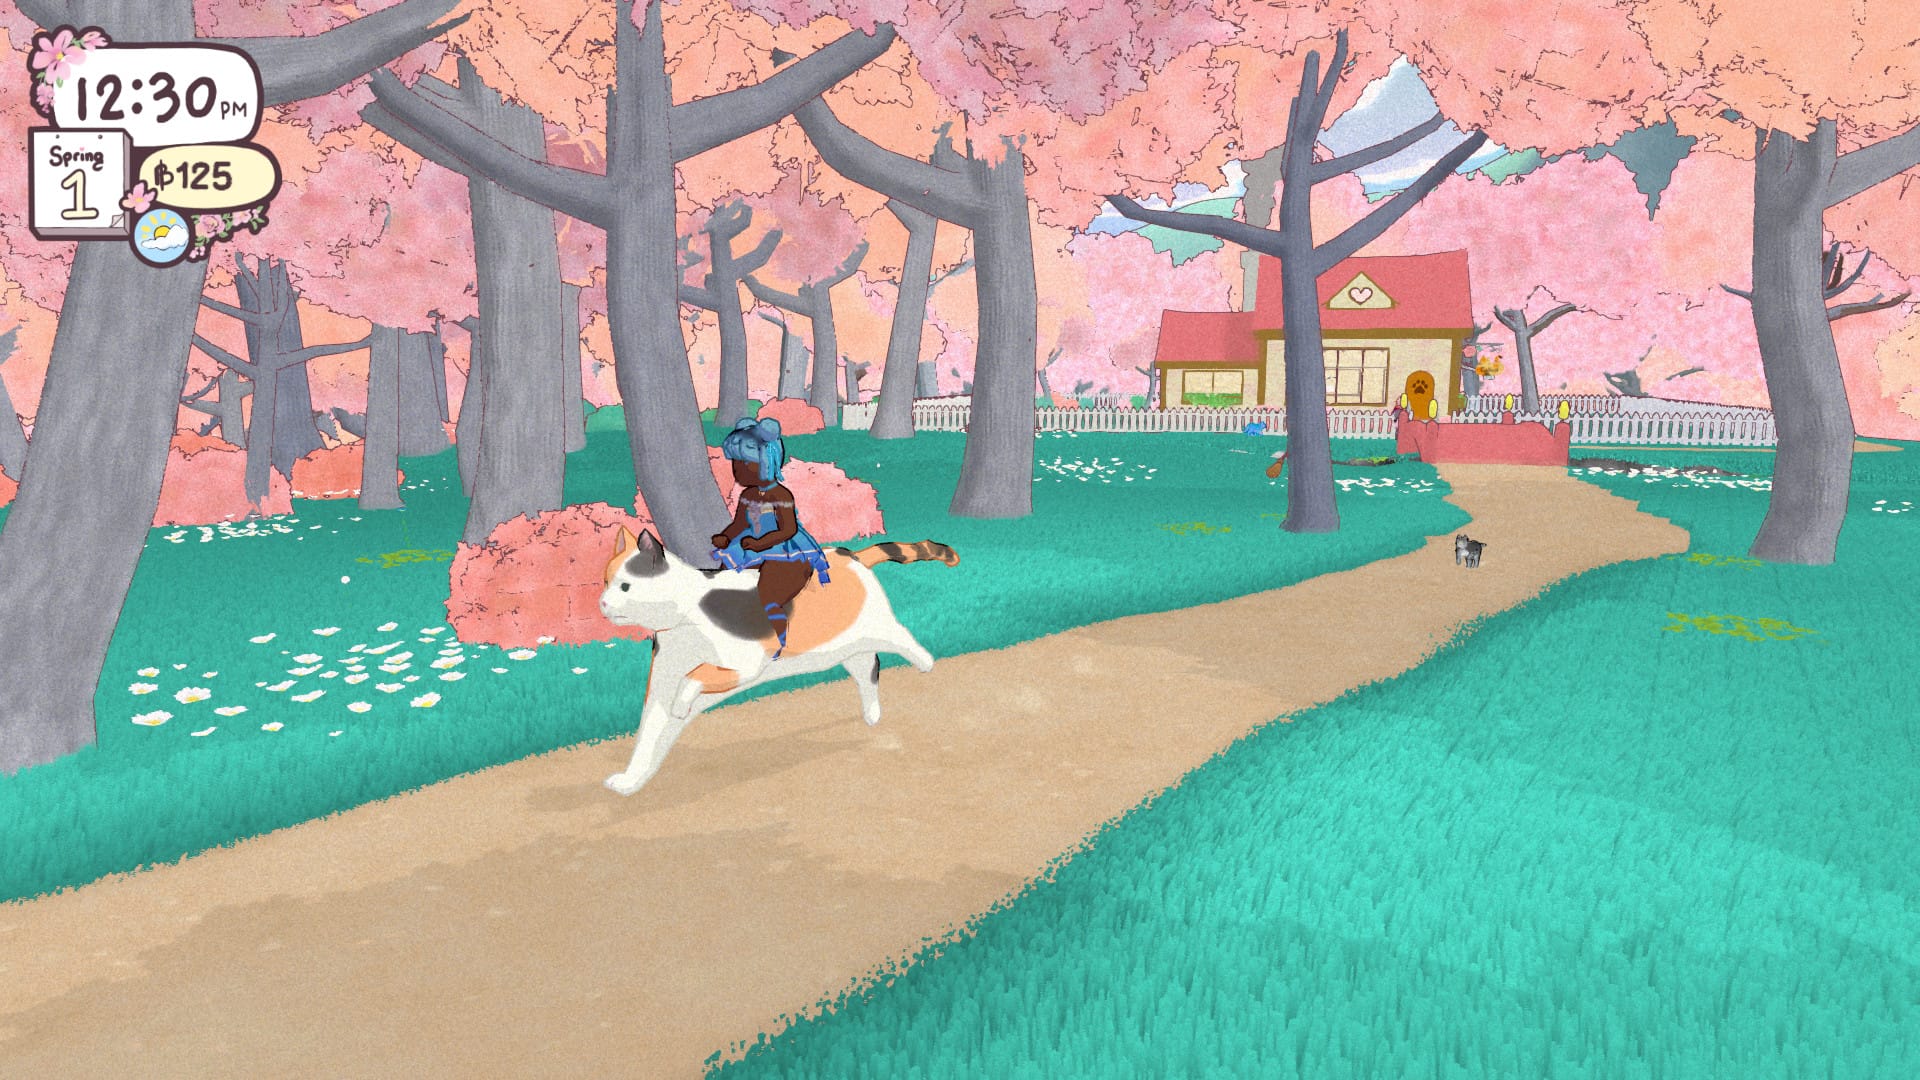 Image is a magical girl riding a giant cat through a forest of pink trees